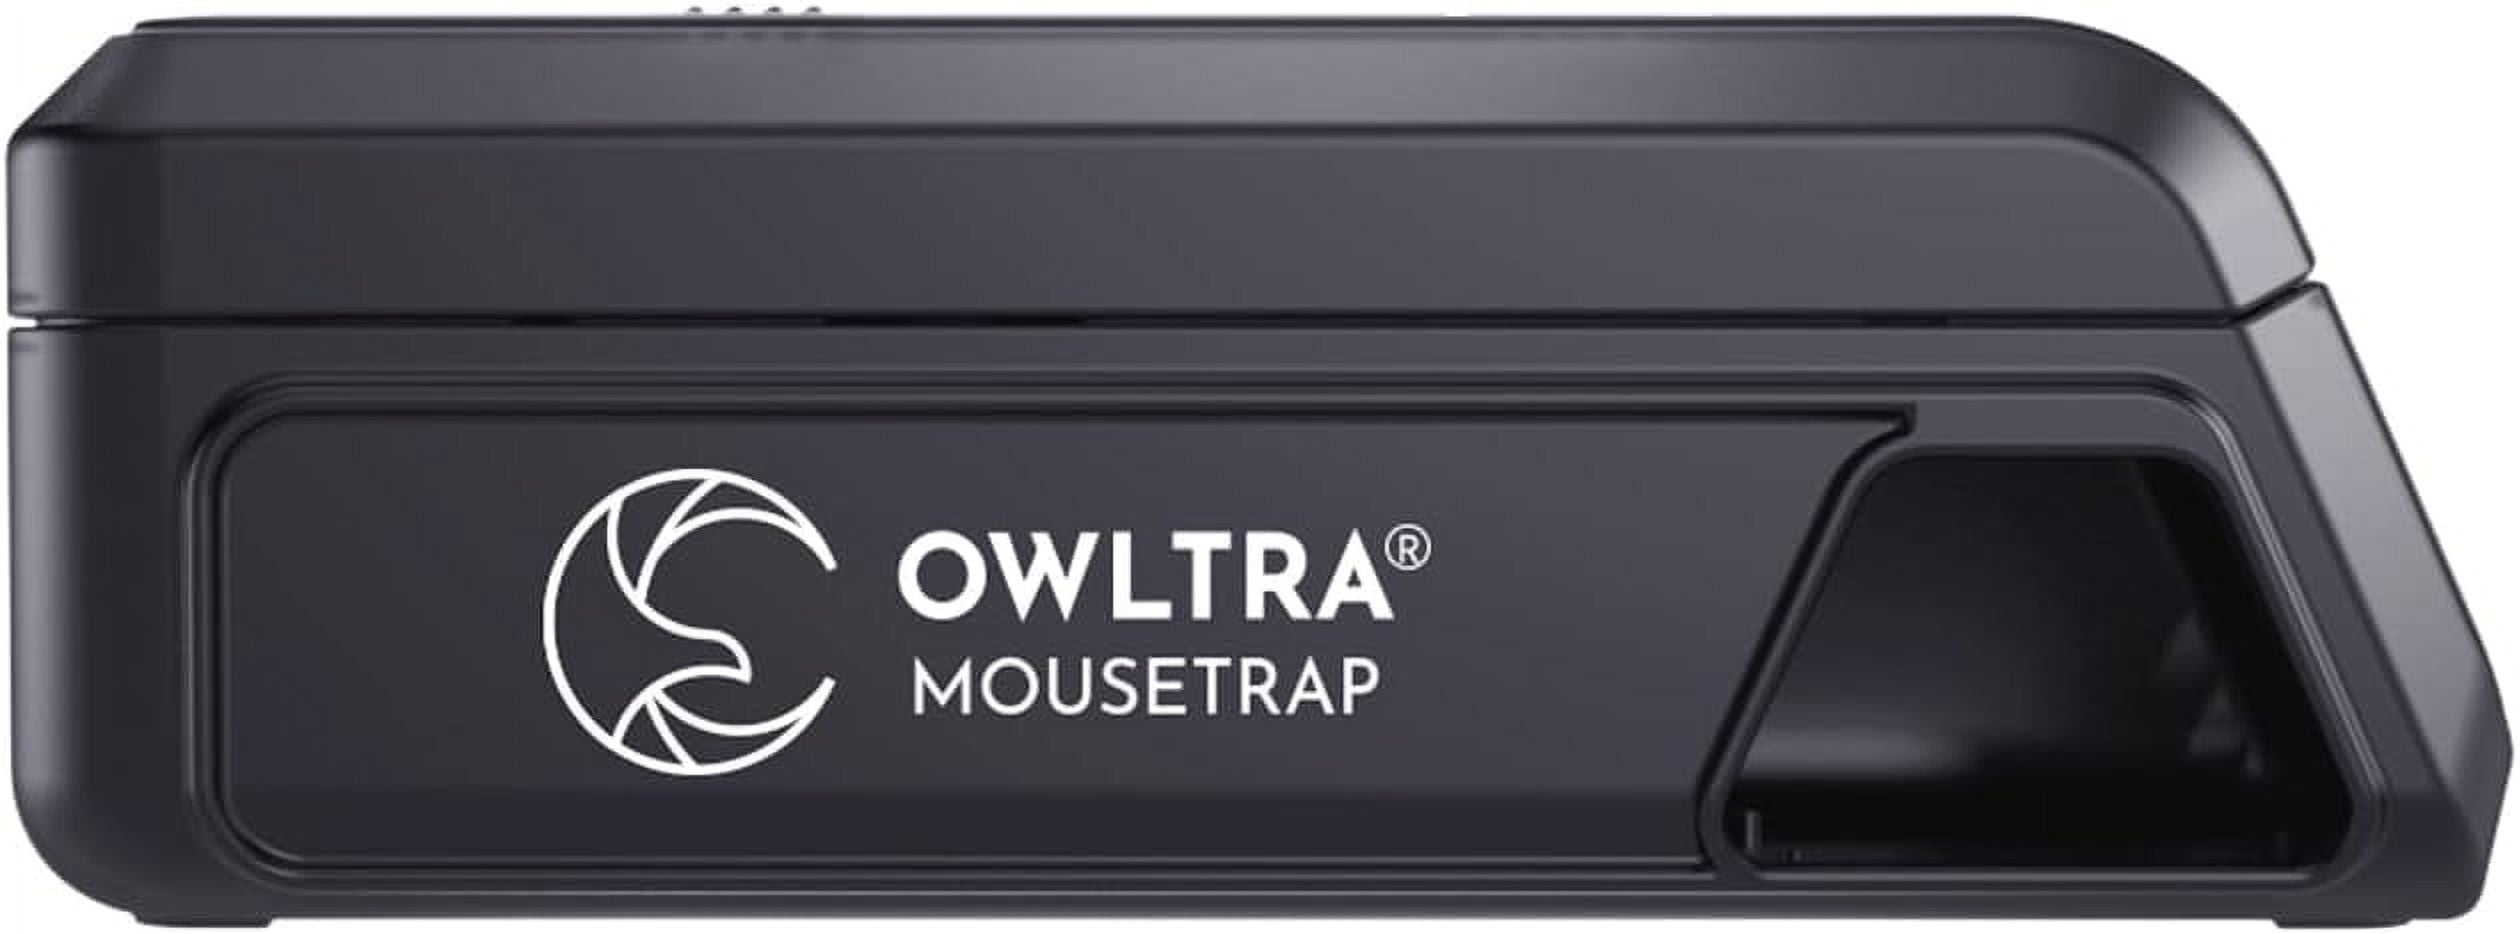 Owltra Infrared Electronic Rat Trap. 6,000 - 10,000 Volts